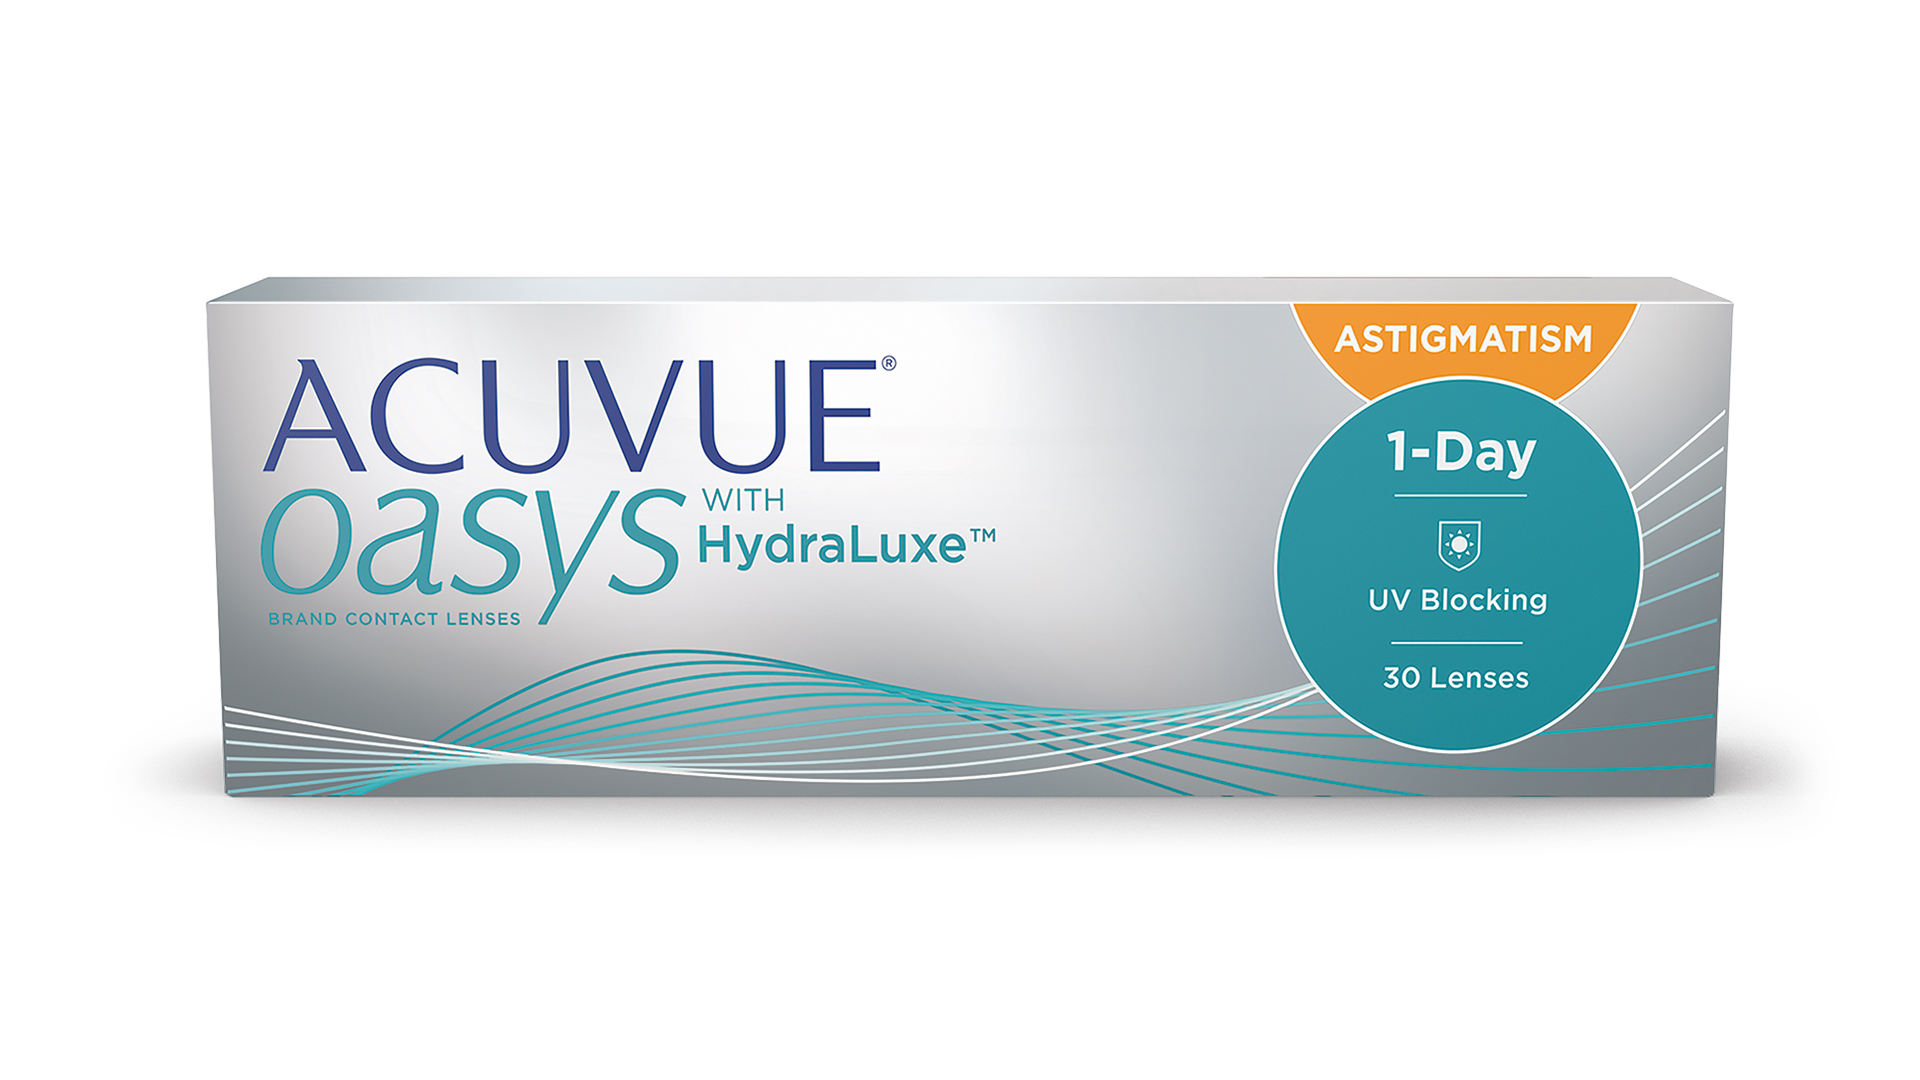 ACUVUE® oasys 1-Day for astigmatism